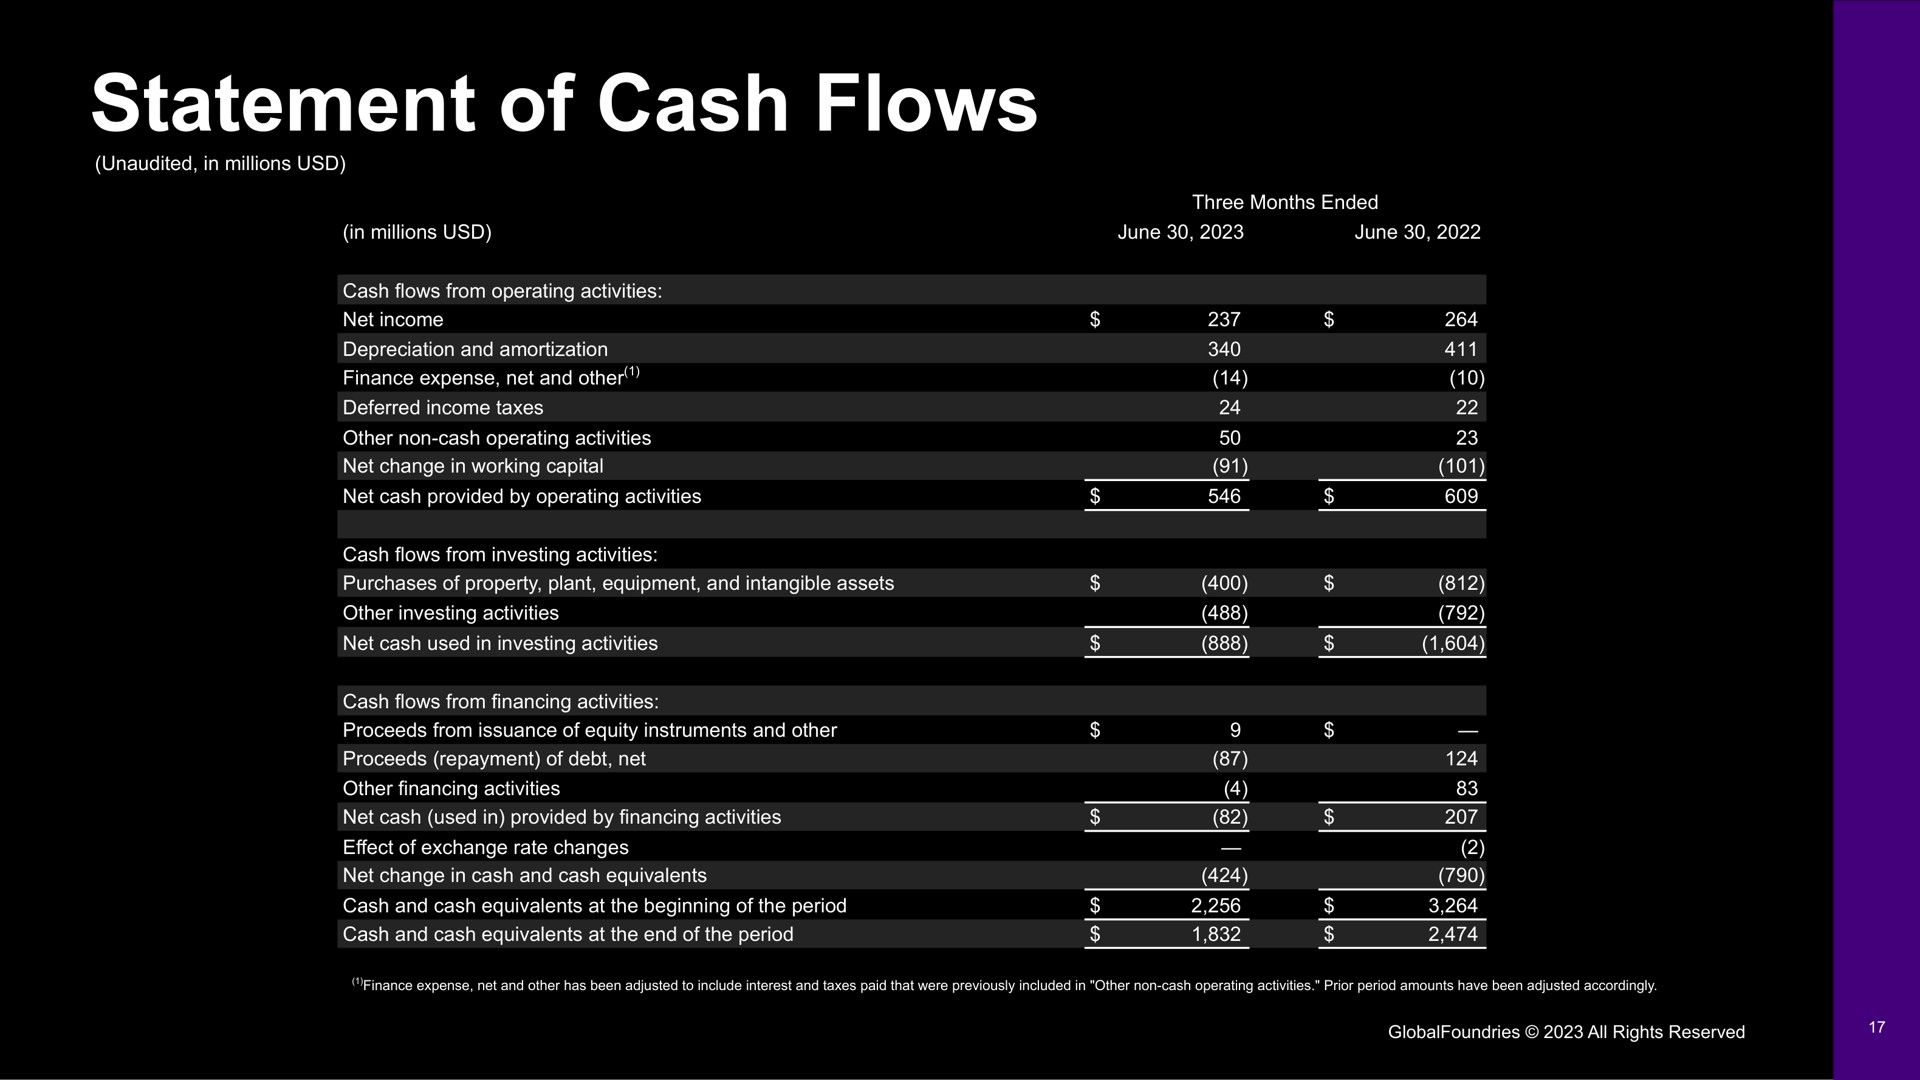 statement of cash flows | GlobalFoundries